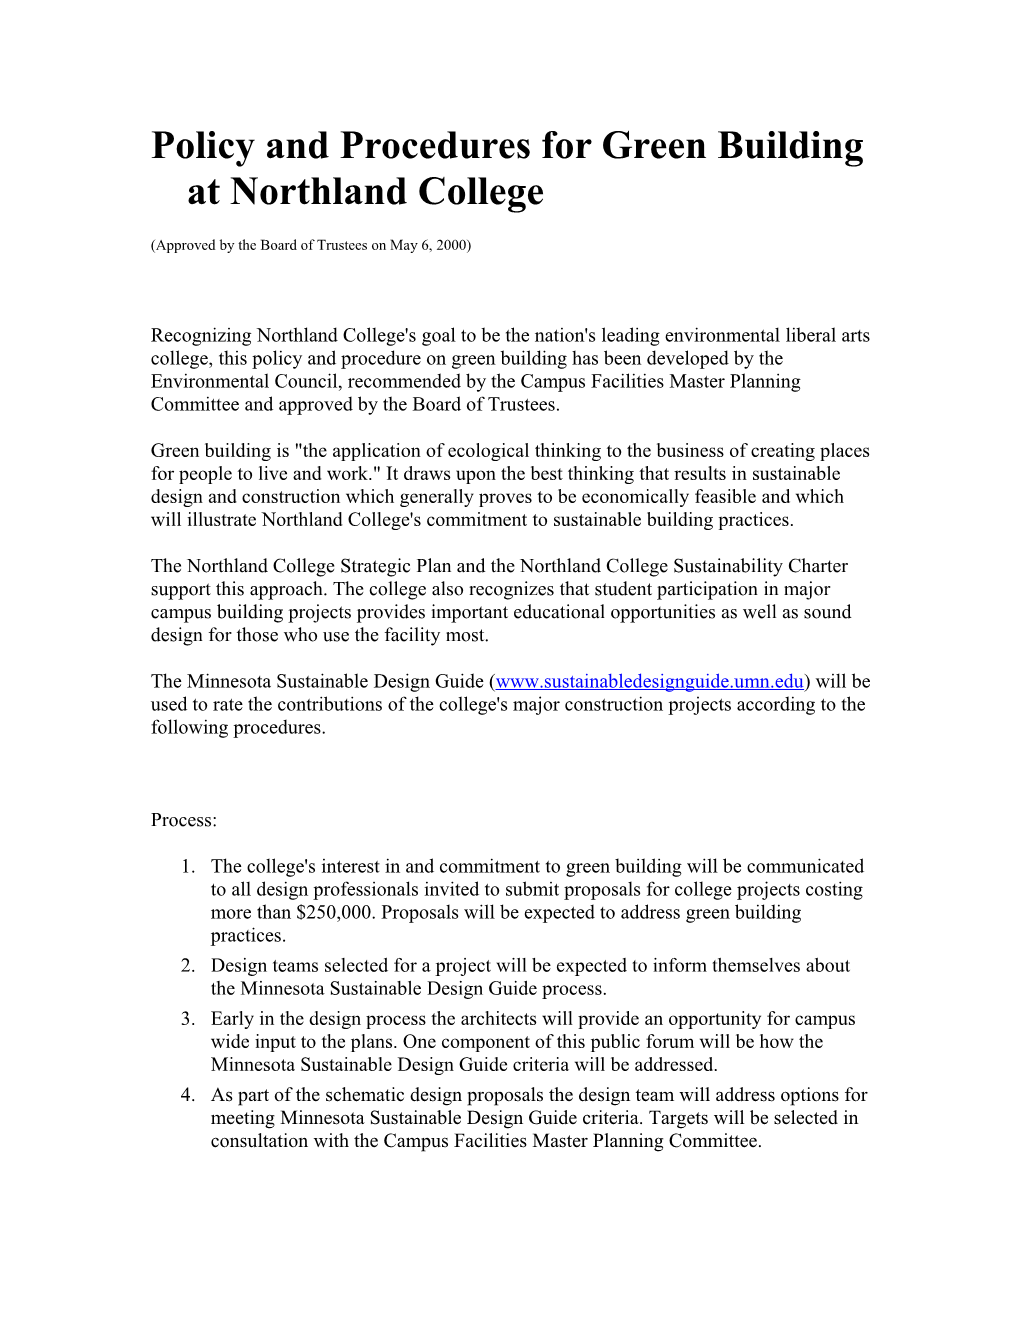 Policy and Procedures for Green Building at Northland College